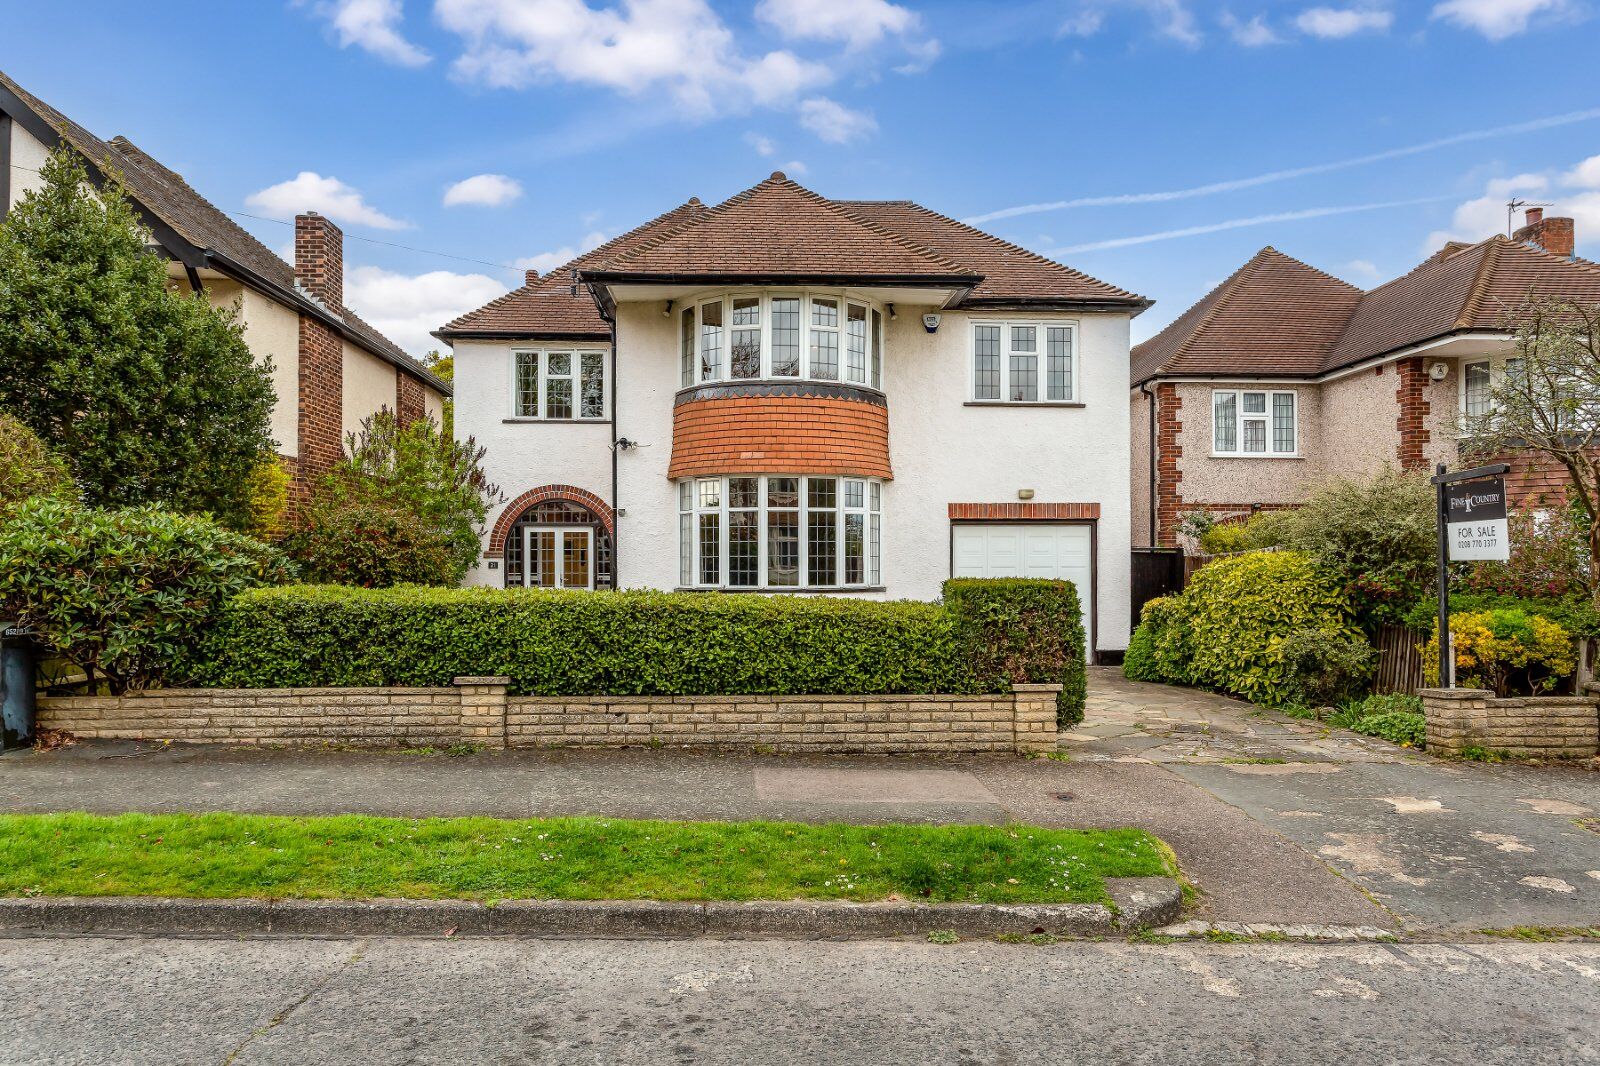 5 bedroom detached house for sale Holmwood Road, Cheam, SM2, main image